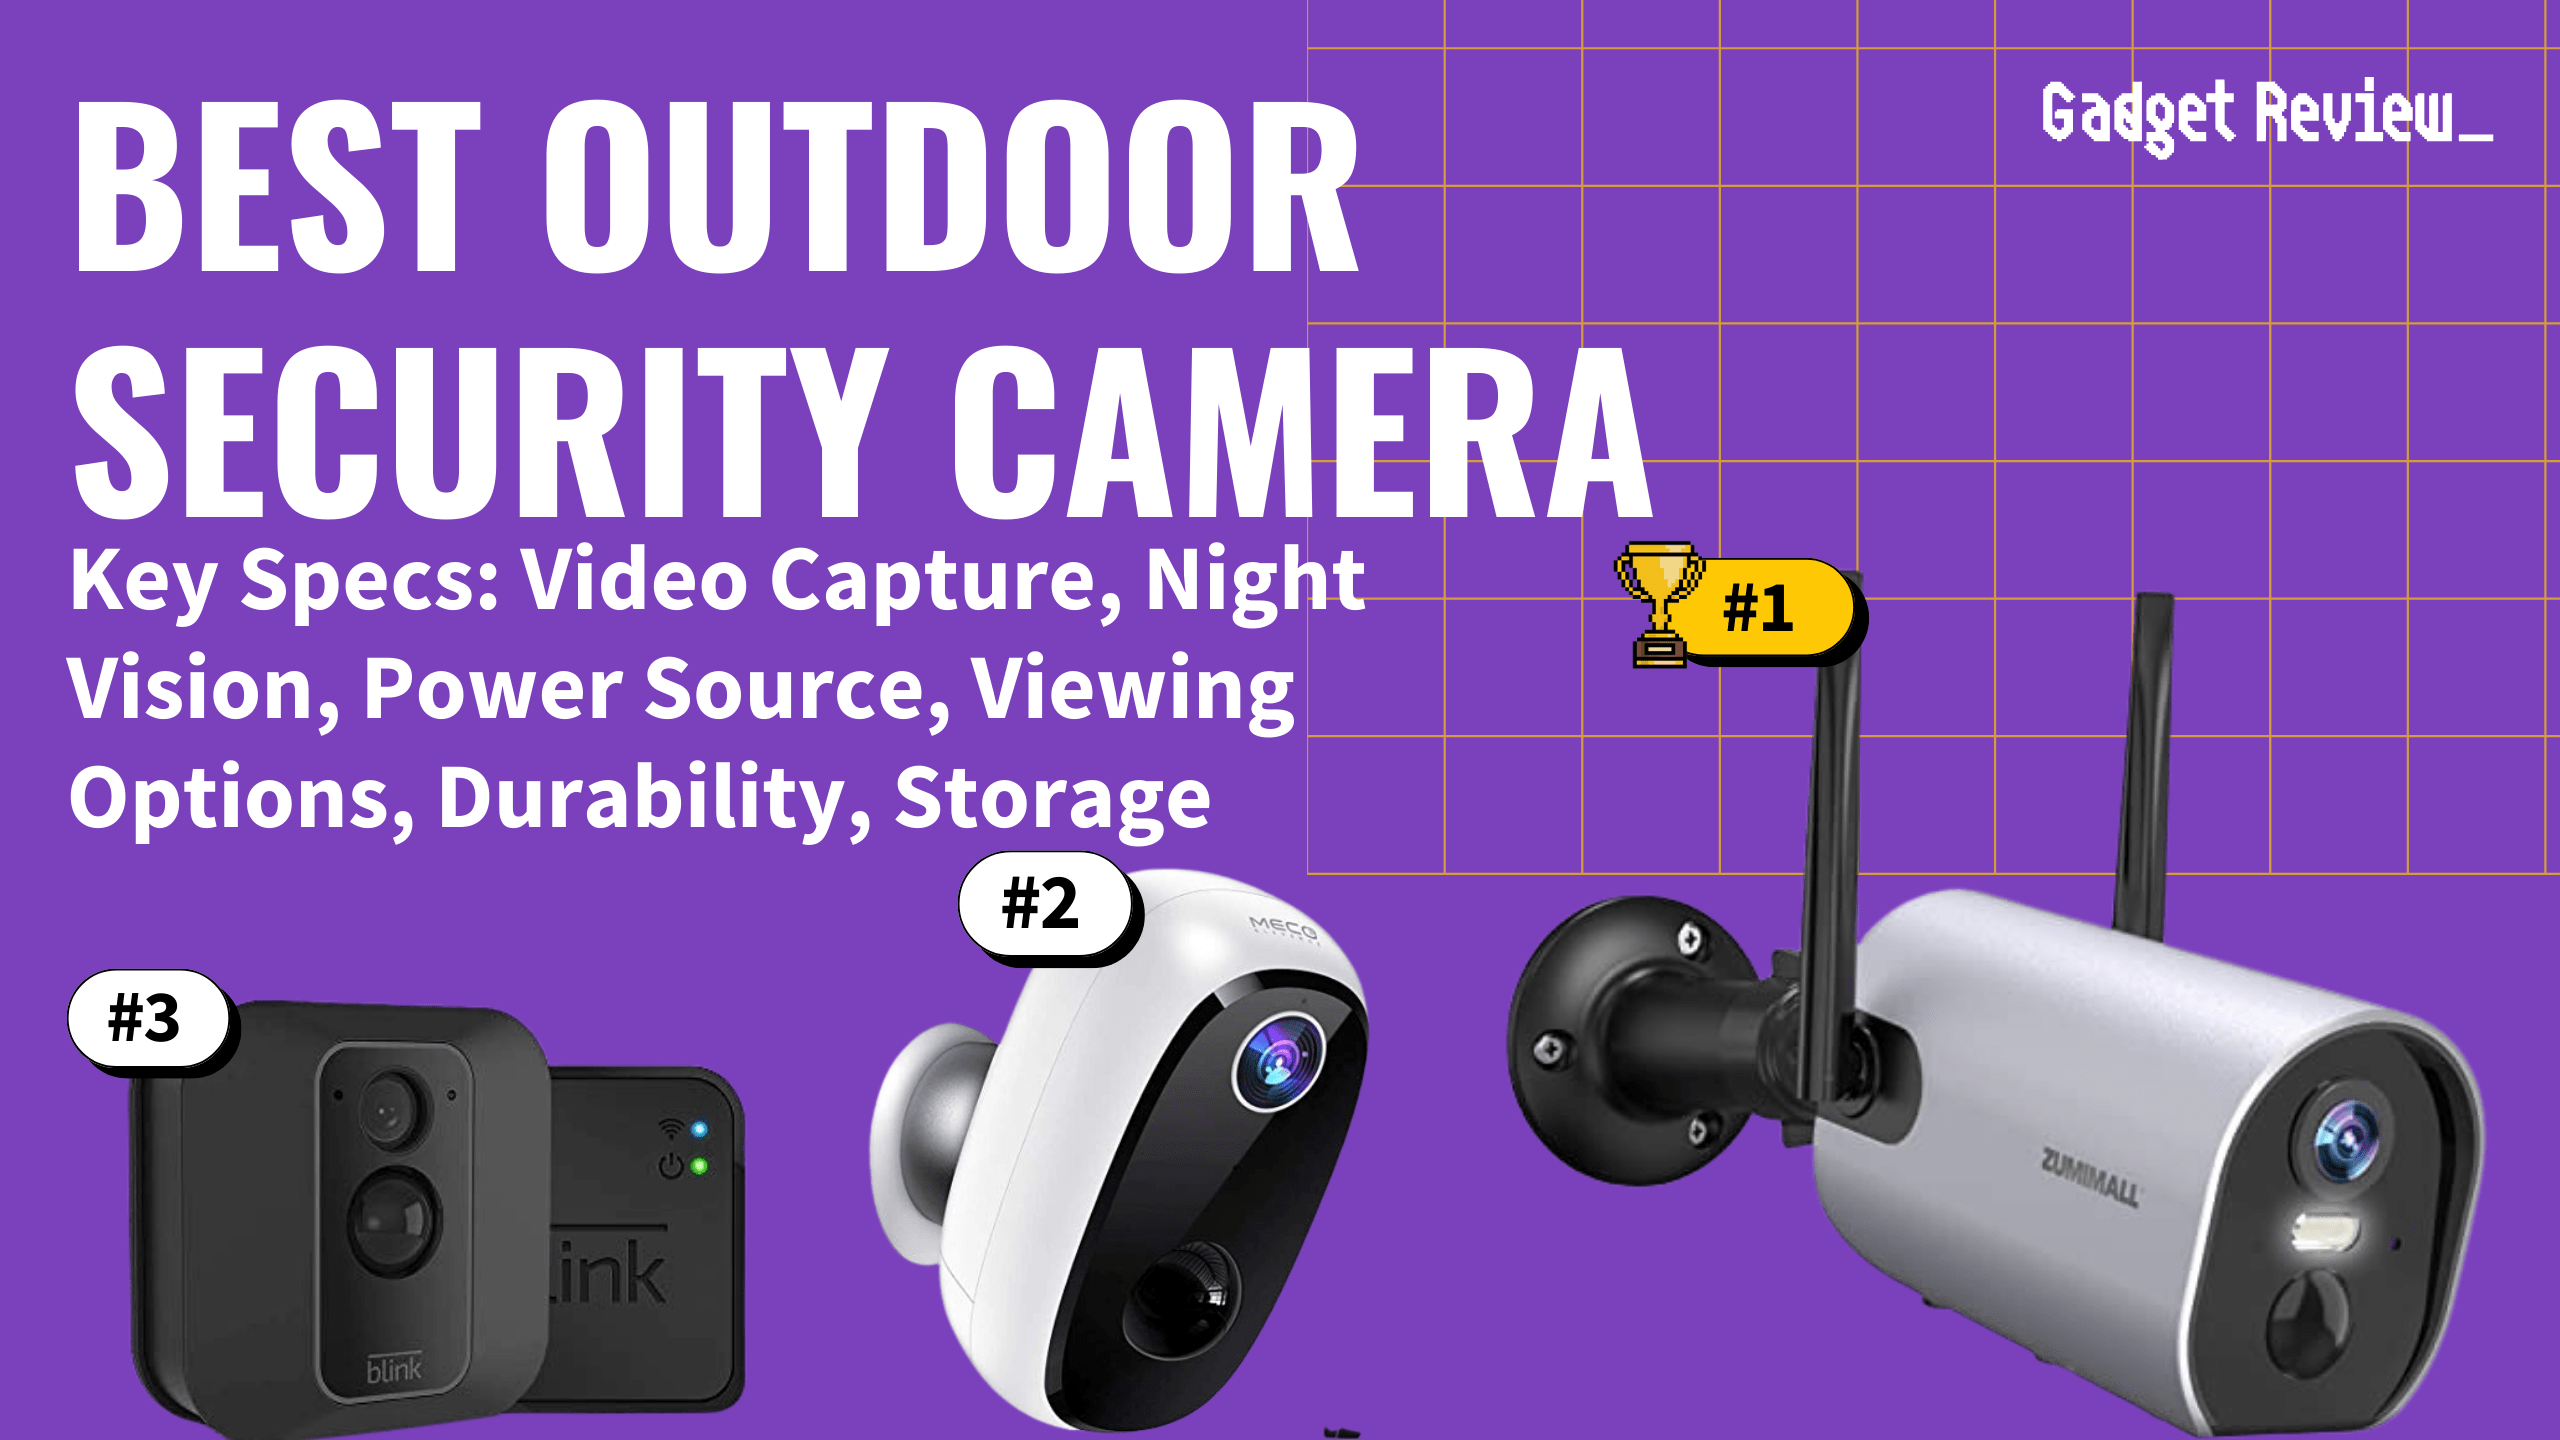 best outdoor security cameras featured image that shows the top three best home security system models